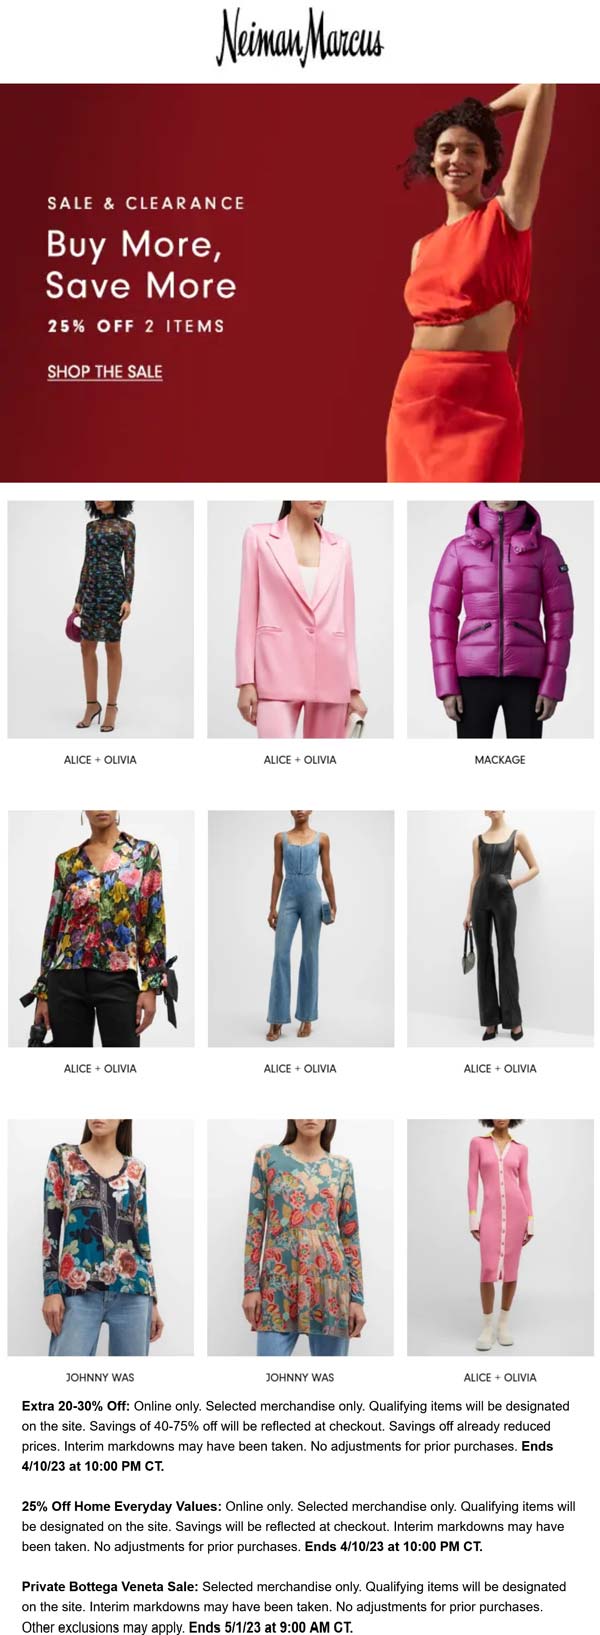 Neiman Marcus stores Coupon  Extra 20-30% off 2+ items online at Neiman Marcus #neimanmarcus 